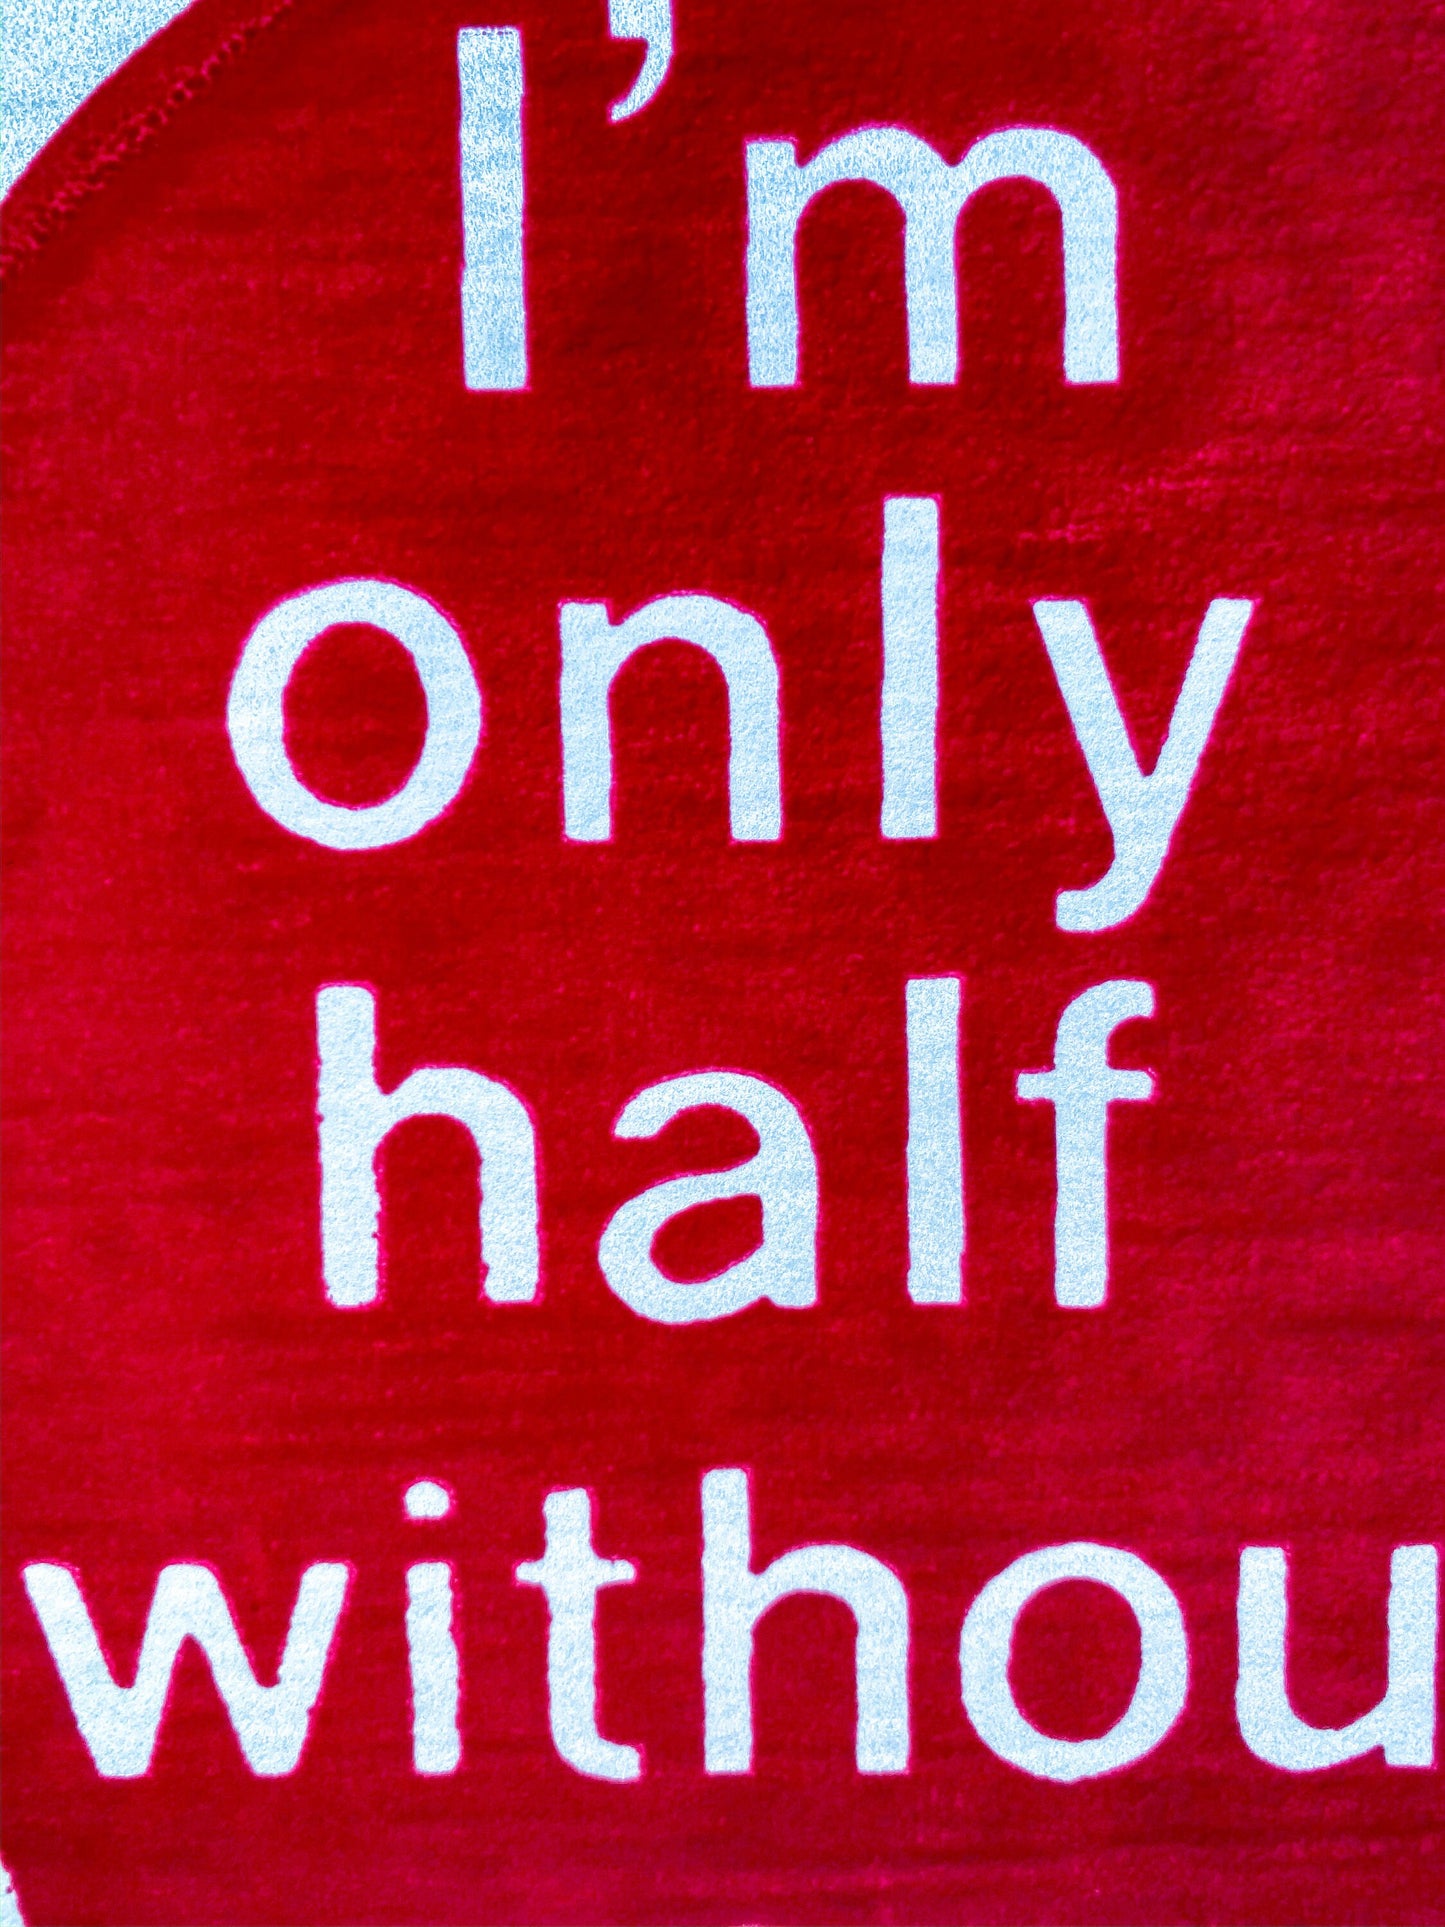 I'm Only Half Without You Heart Vintage Iron On Heat Transfer